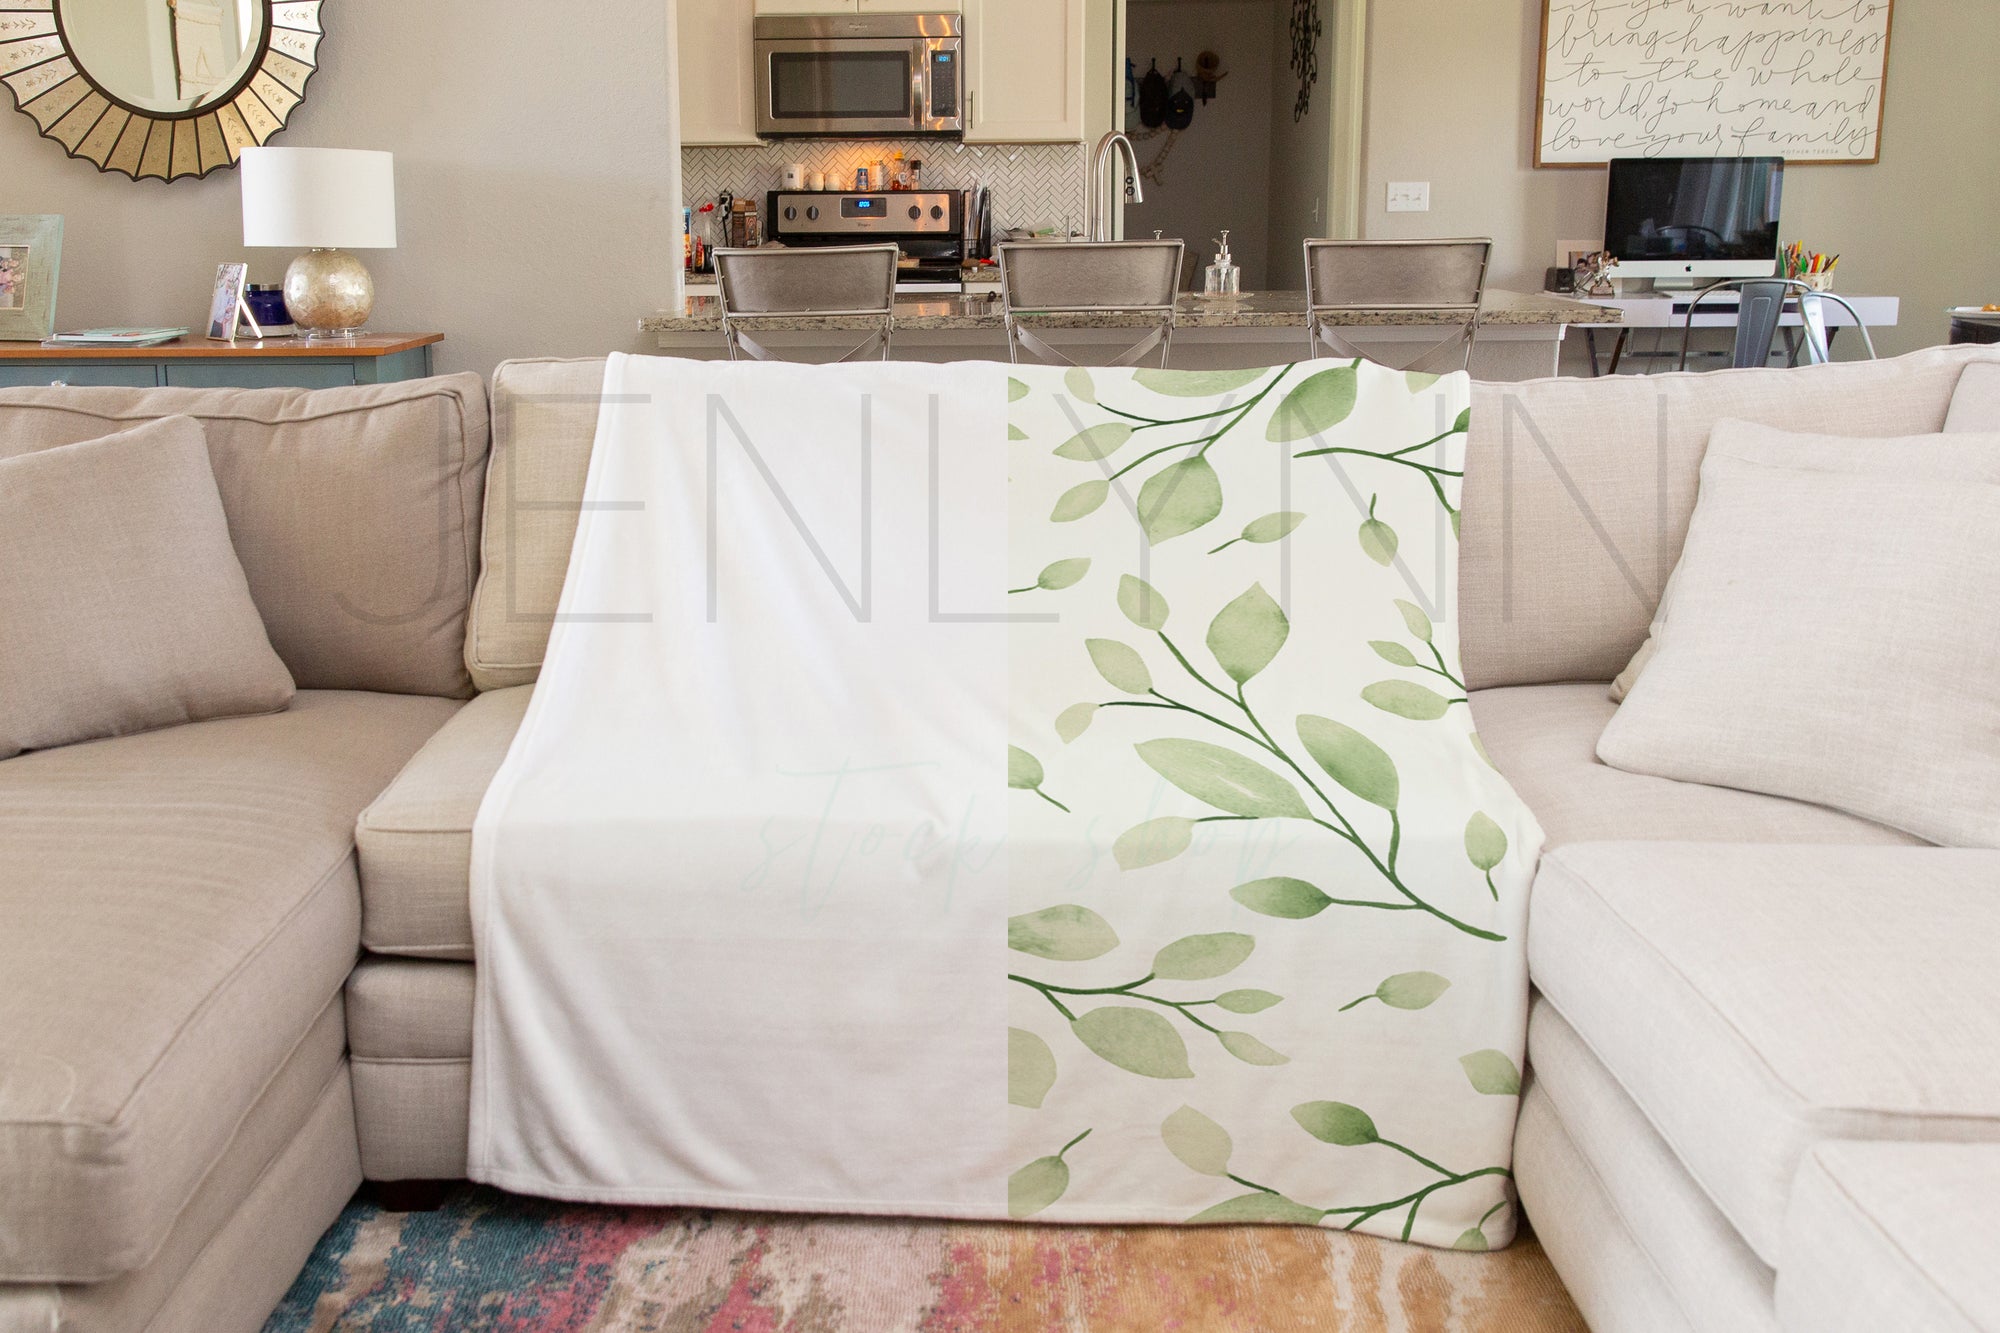 Minky Blanket on Couch Mockup #BH5